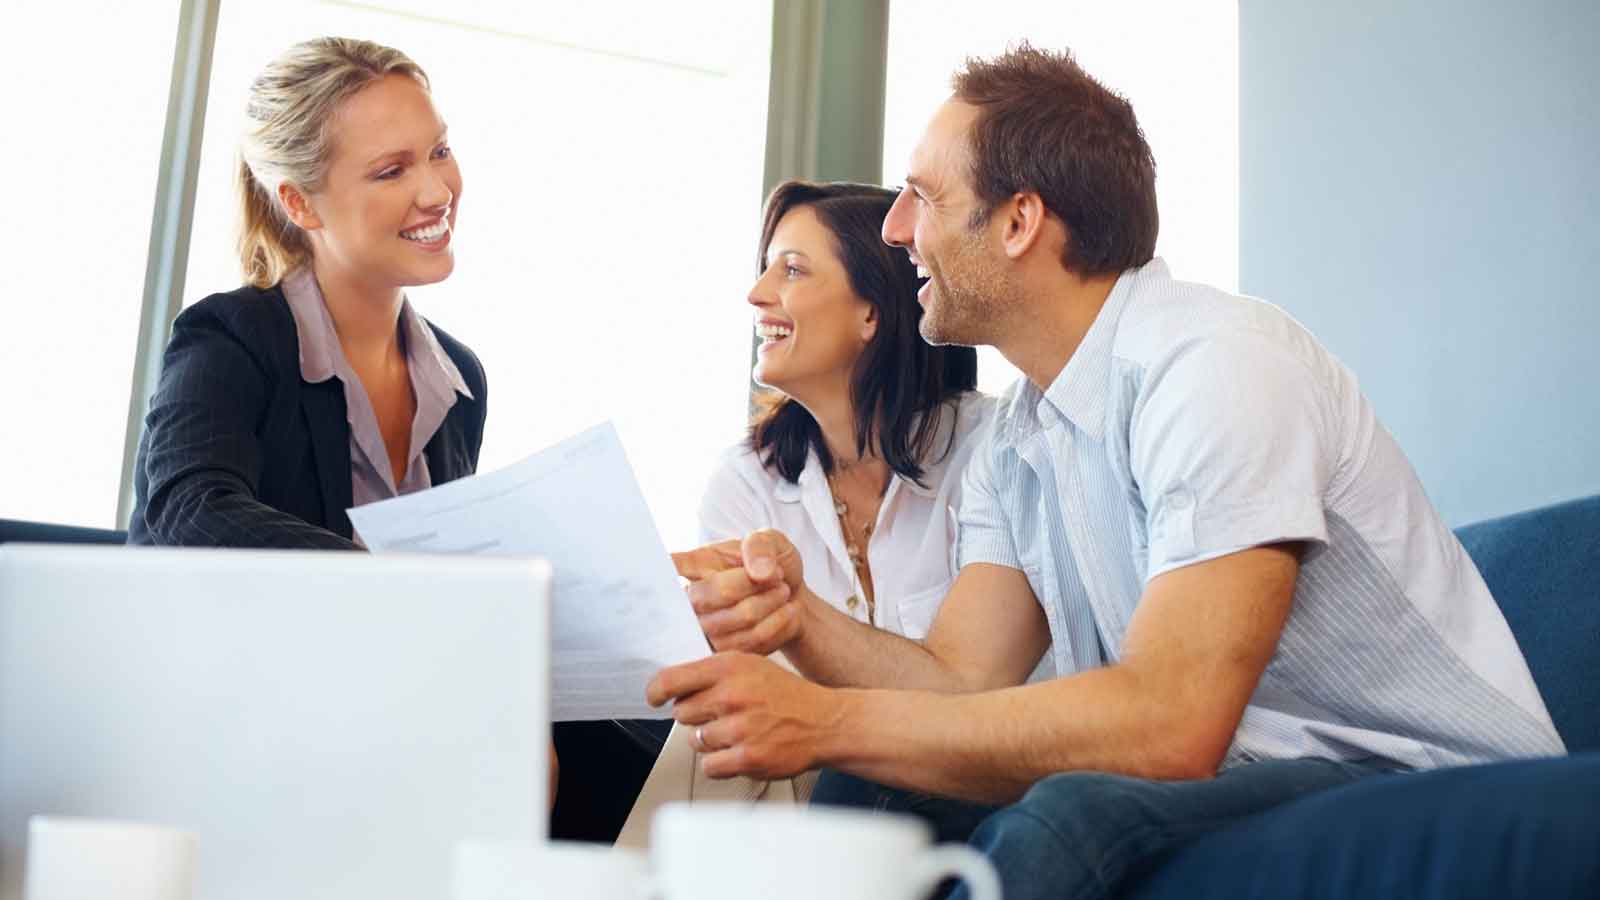 Increase your peace of mind with Credit Counseling Singapore